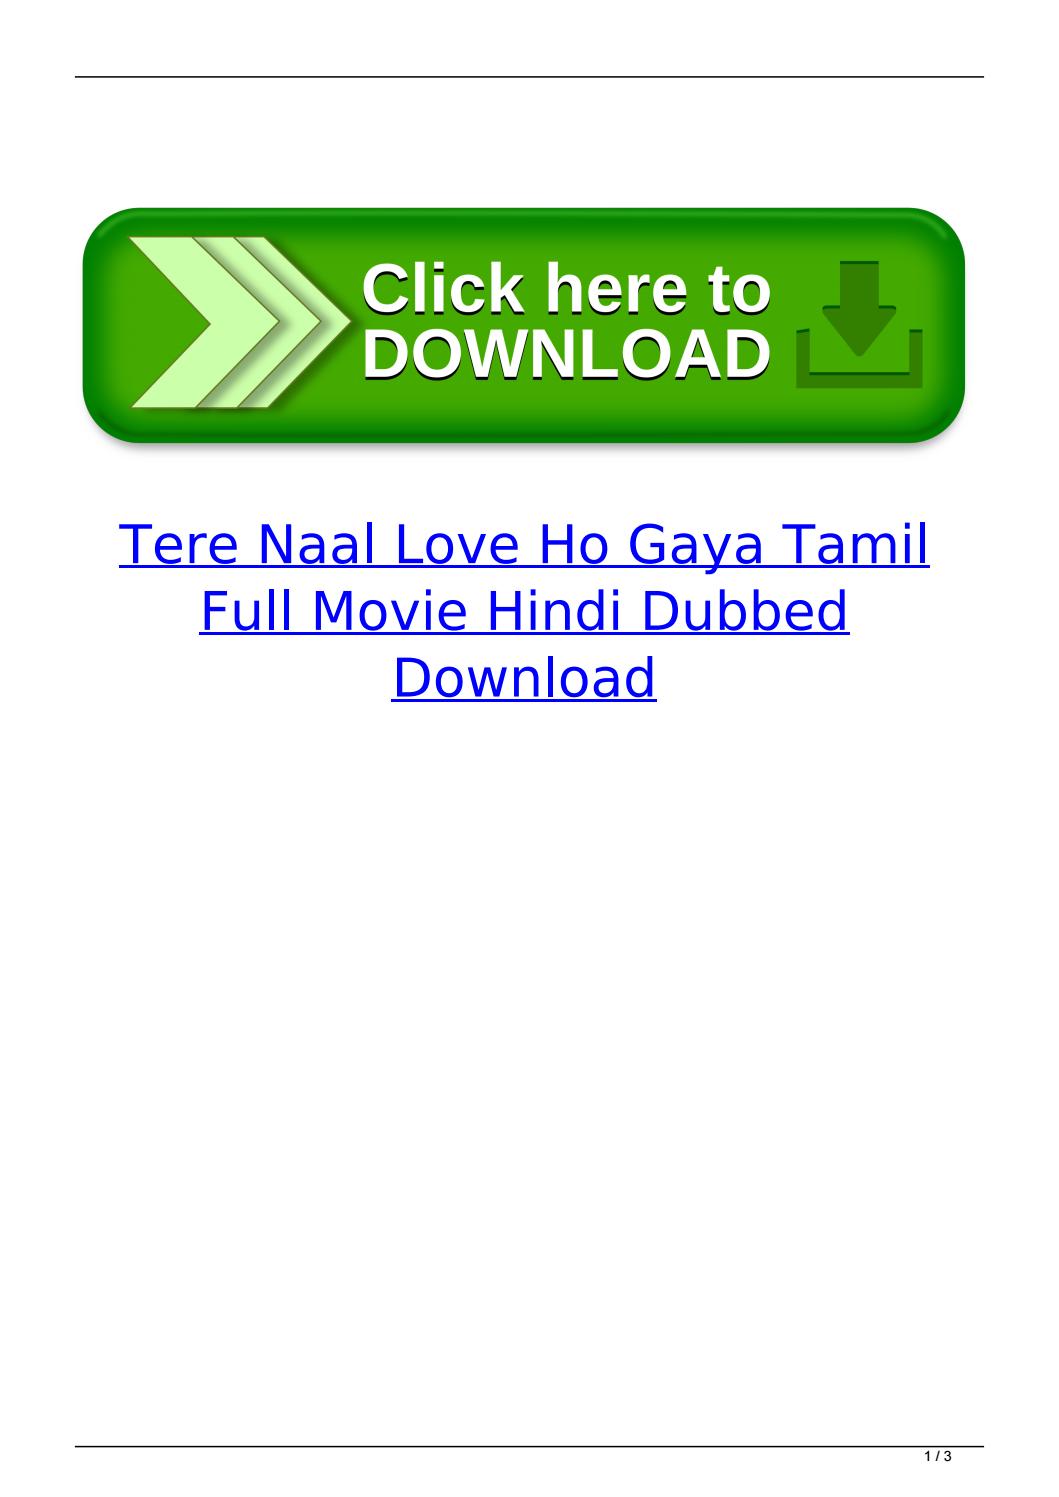 Tamil movie hindi dubbed download filmywap